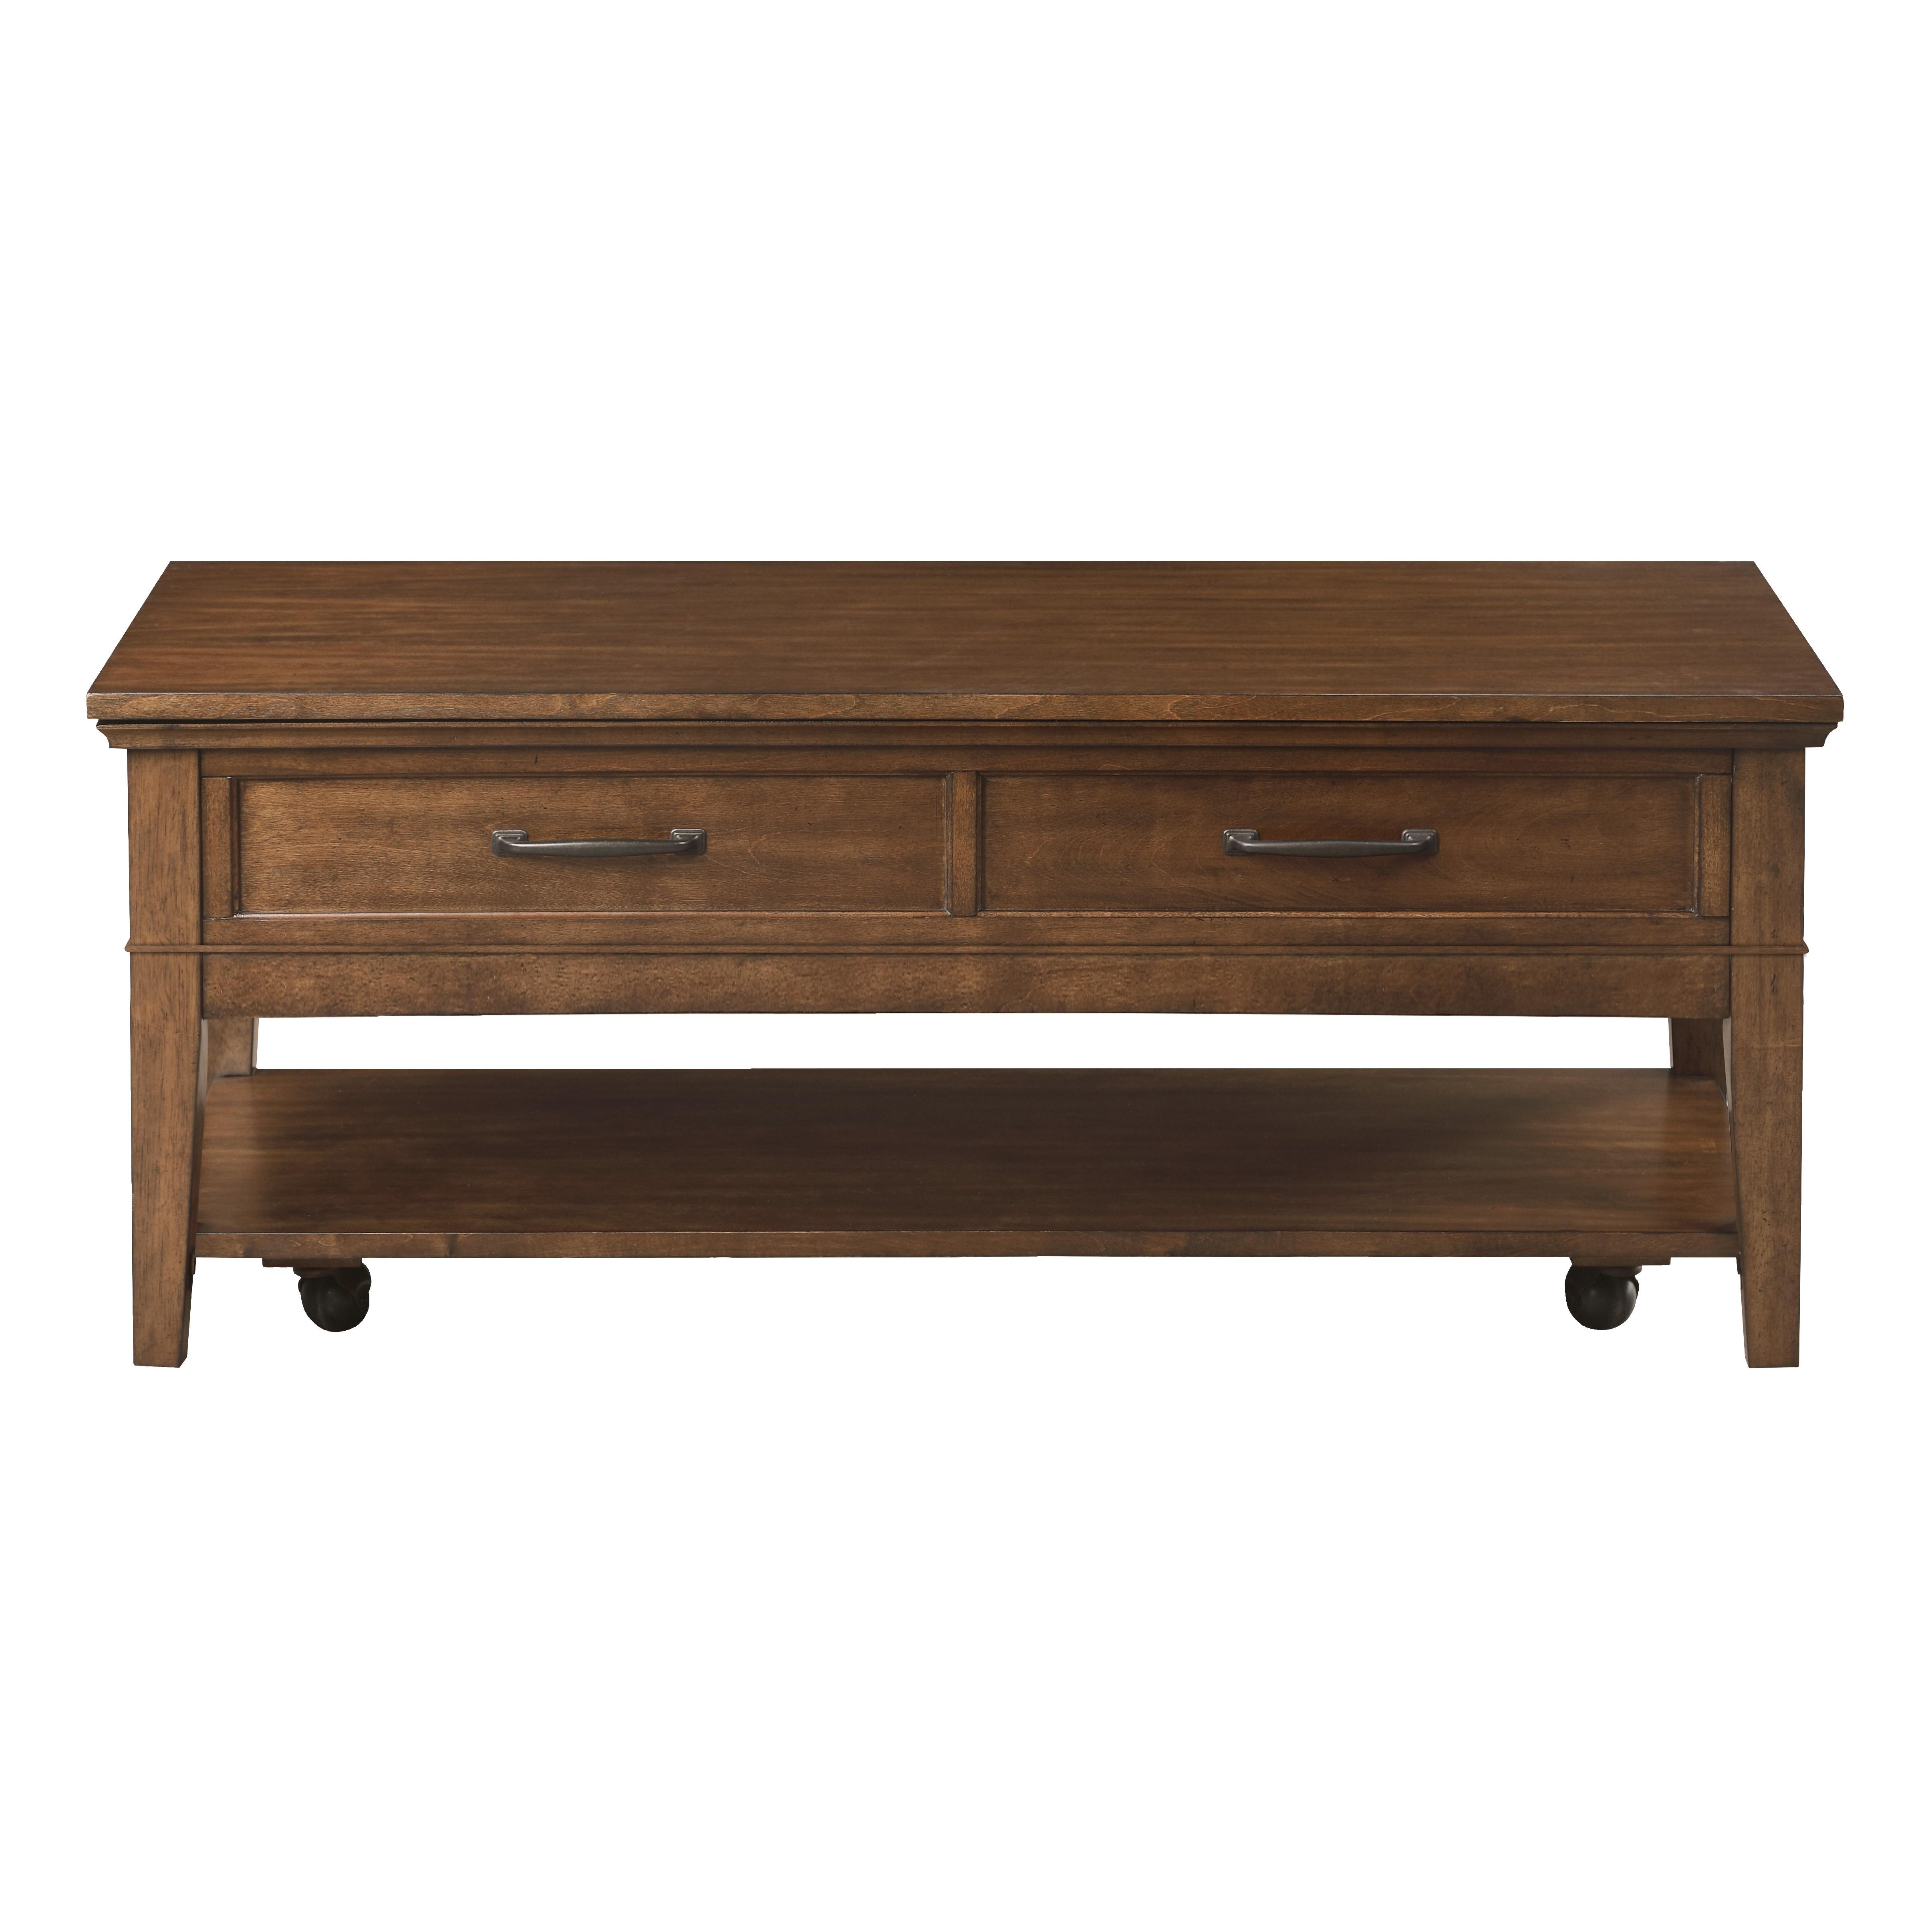 Transitional Cocktail Table 3620-30 Whitley 3620-30 in Walnut 